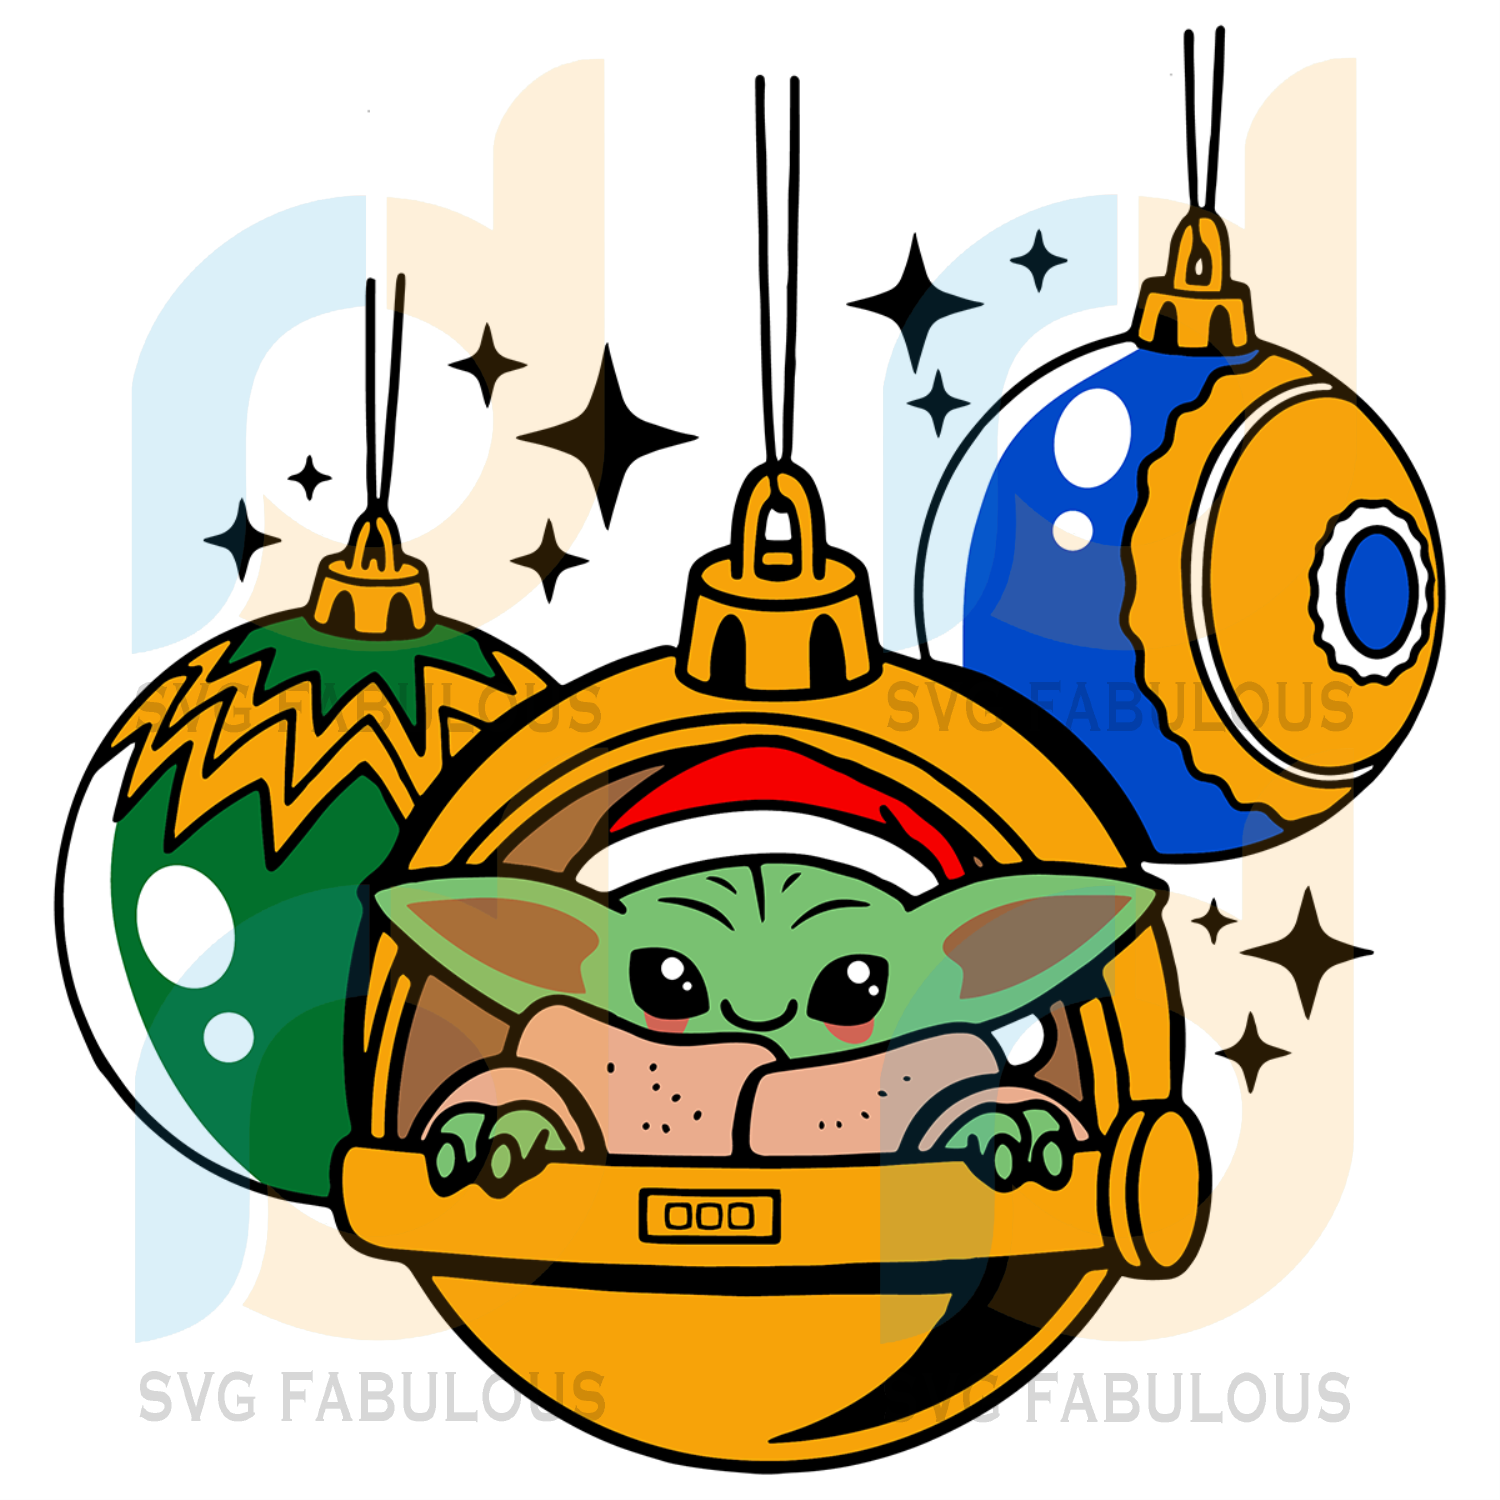 Download Baby Yoda In Christmas Ball Svg Christmas Svg Xmas Svg Merry Christ Svg Fabulous